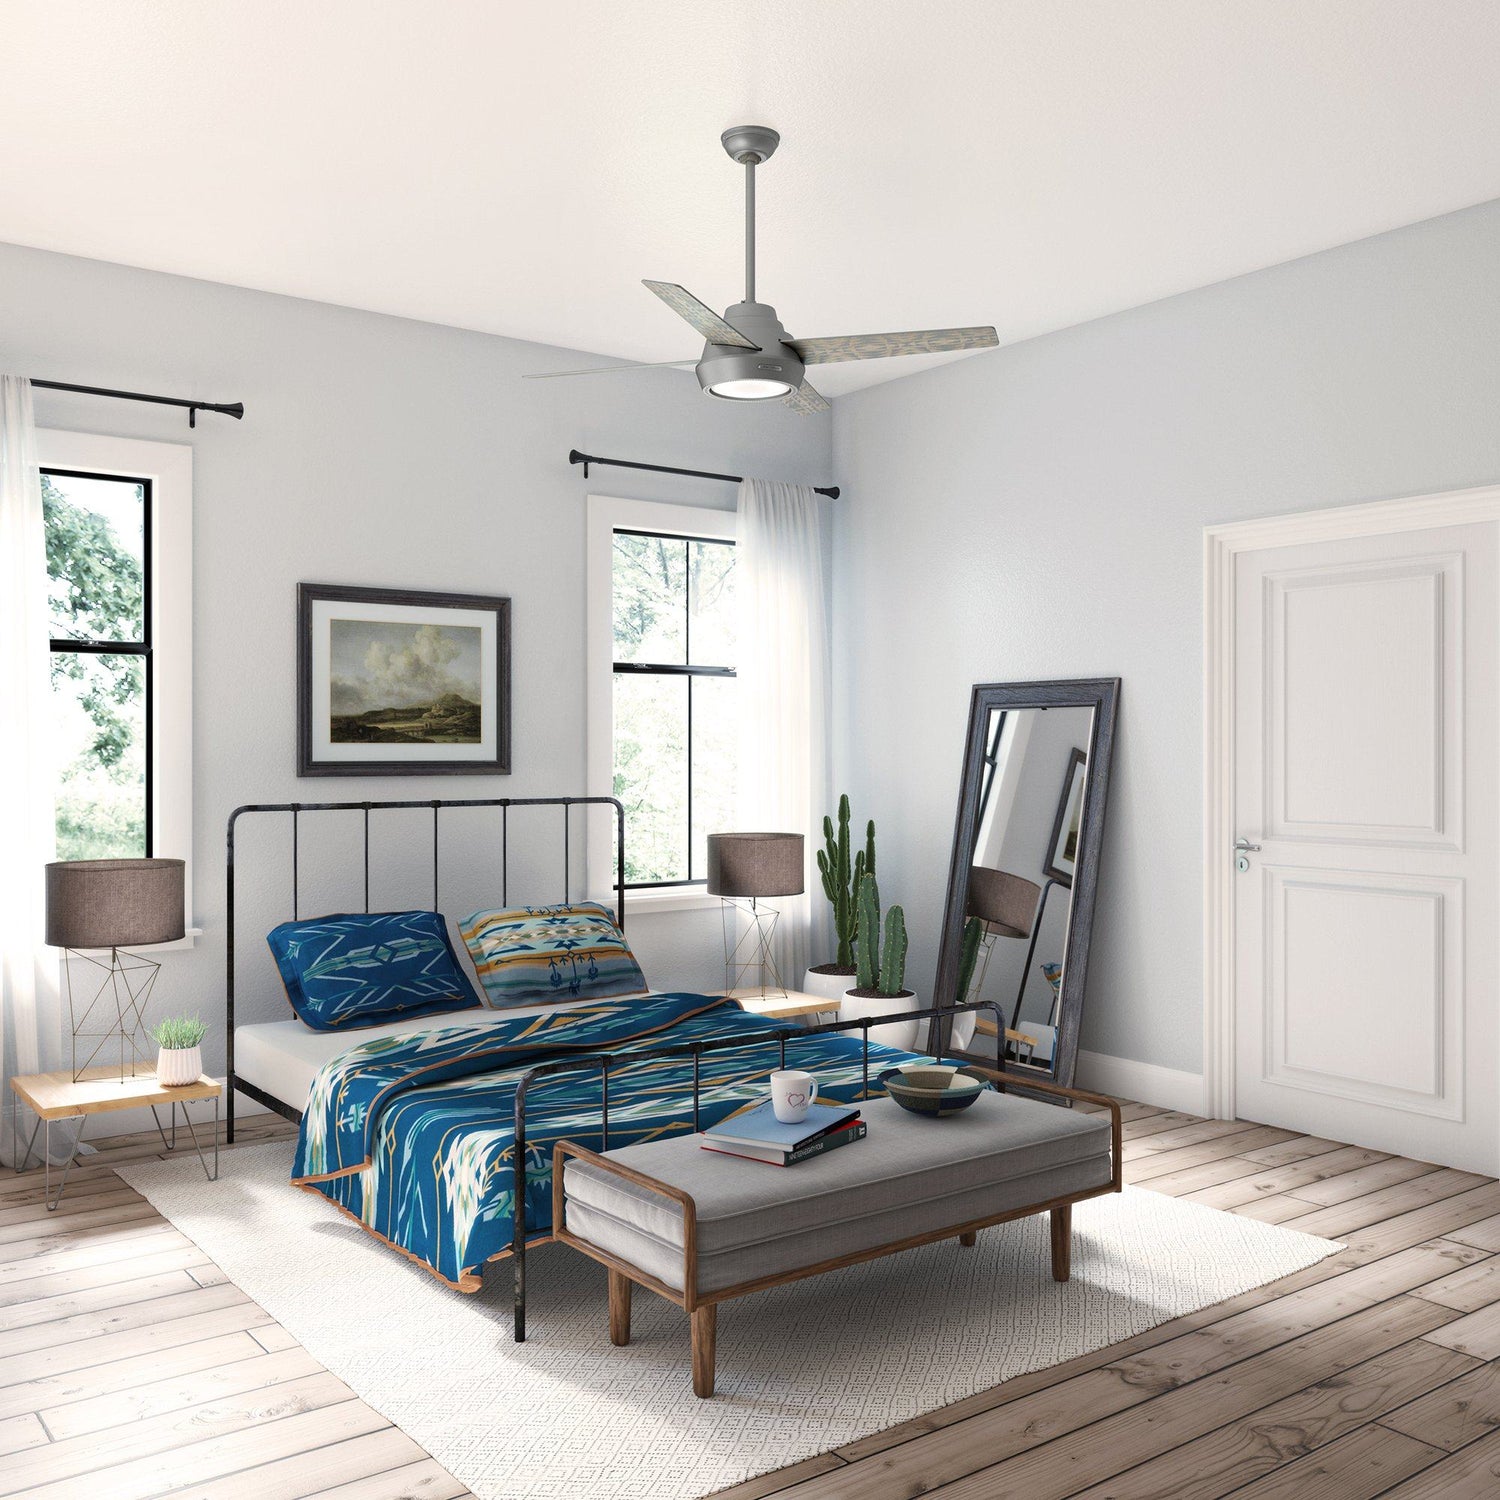 Bedroom ceiling fan ideas to transform your space